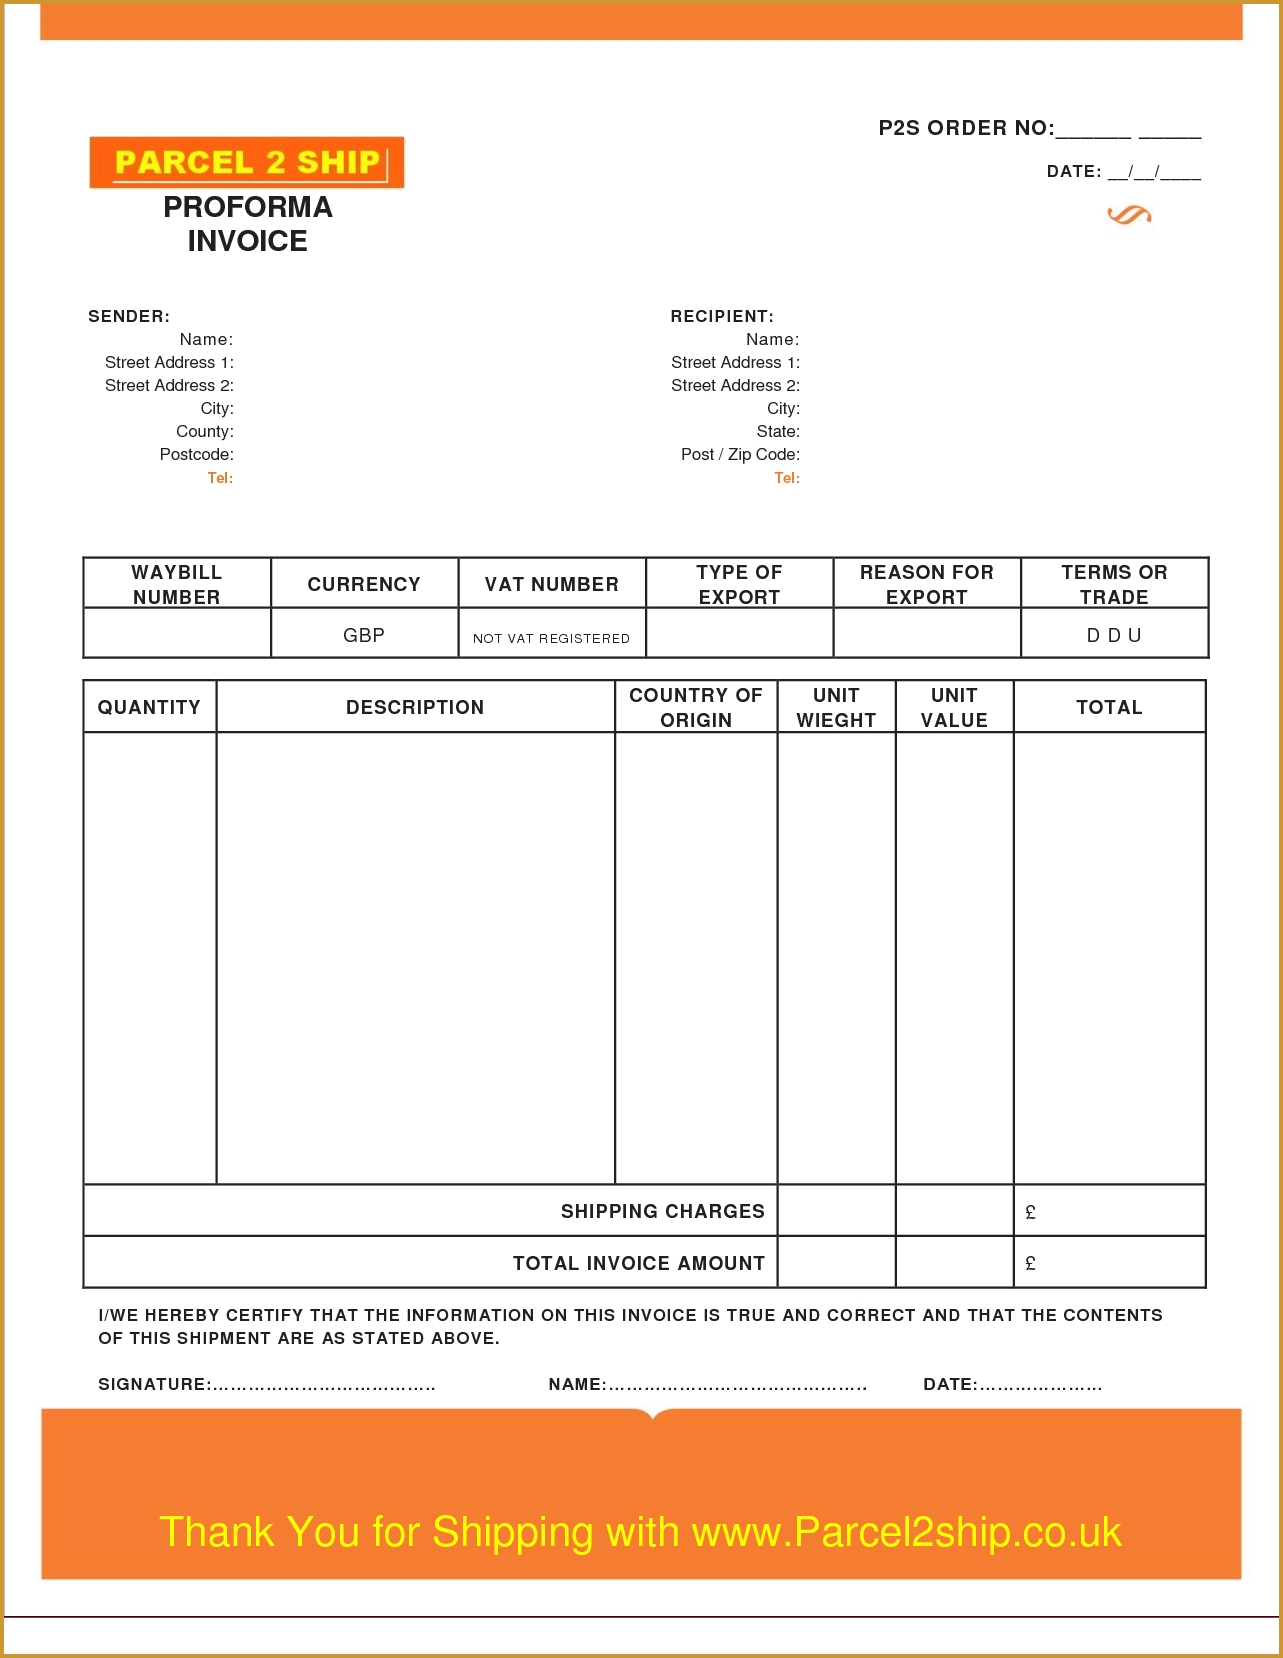 proforma invoice sample excel 13 samples and the importance of proforma invoice template excel 1283 X 1658